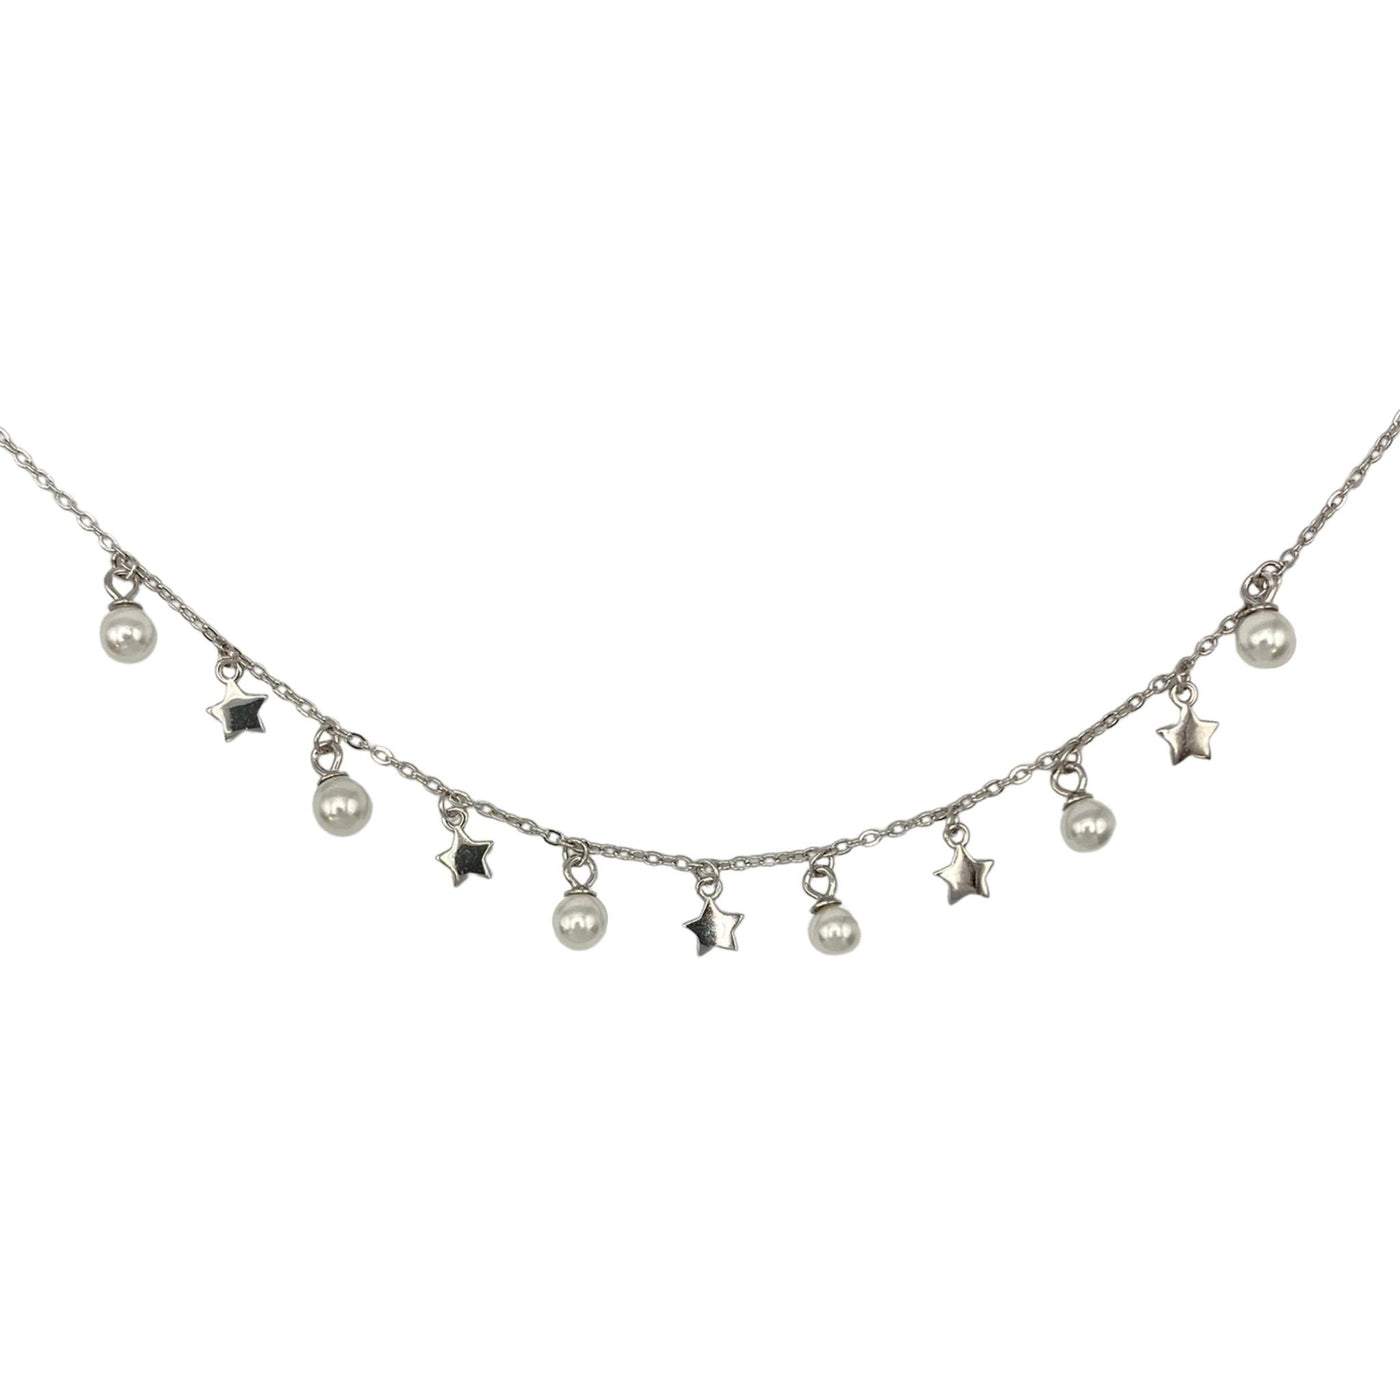 Silver necklace with pearls and stars